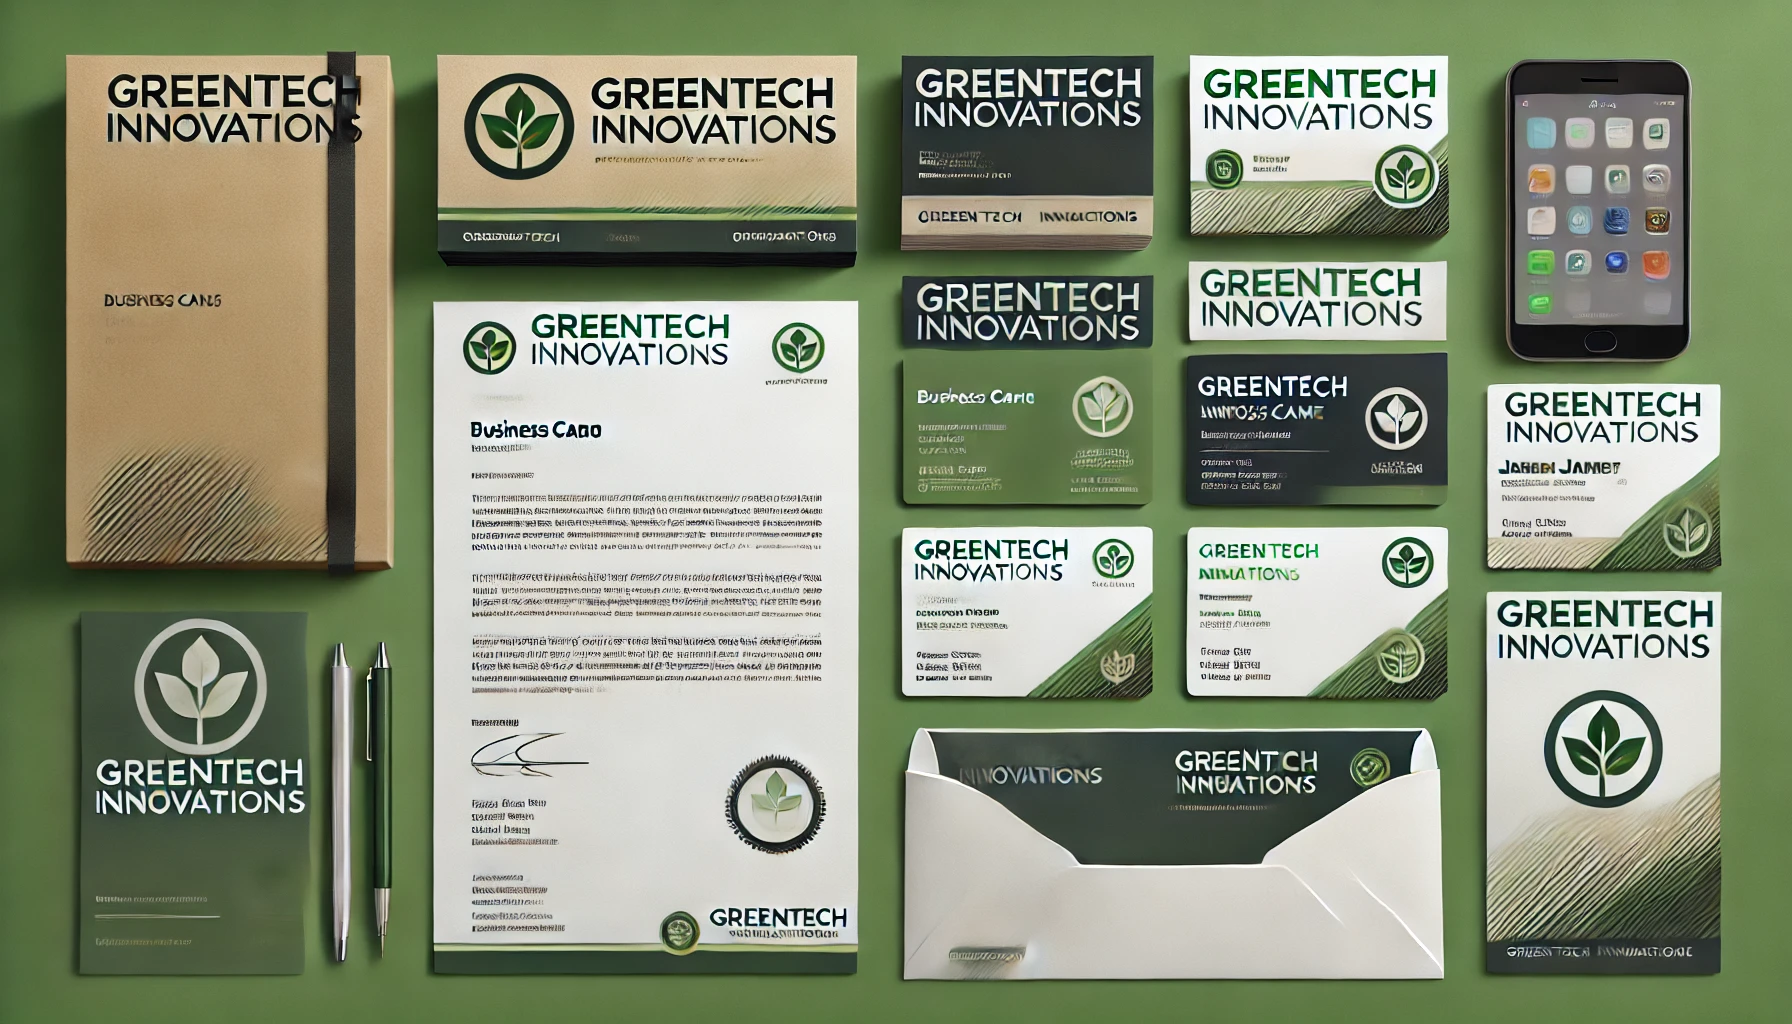 Print design portfolio showcasing business cards, brochures, and flyers for EcoGreen Solutions, a fictitious company, with consistent branding and vibrant colors.